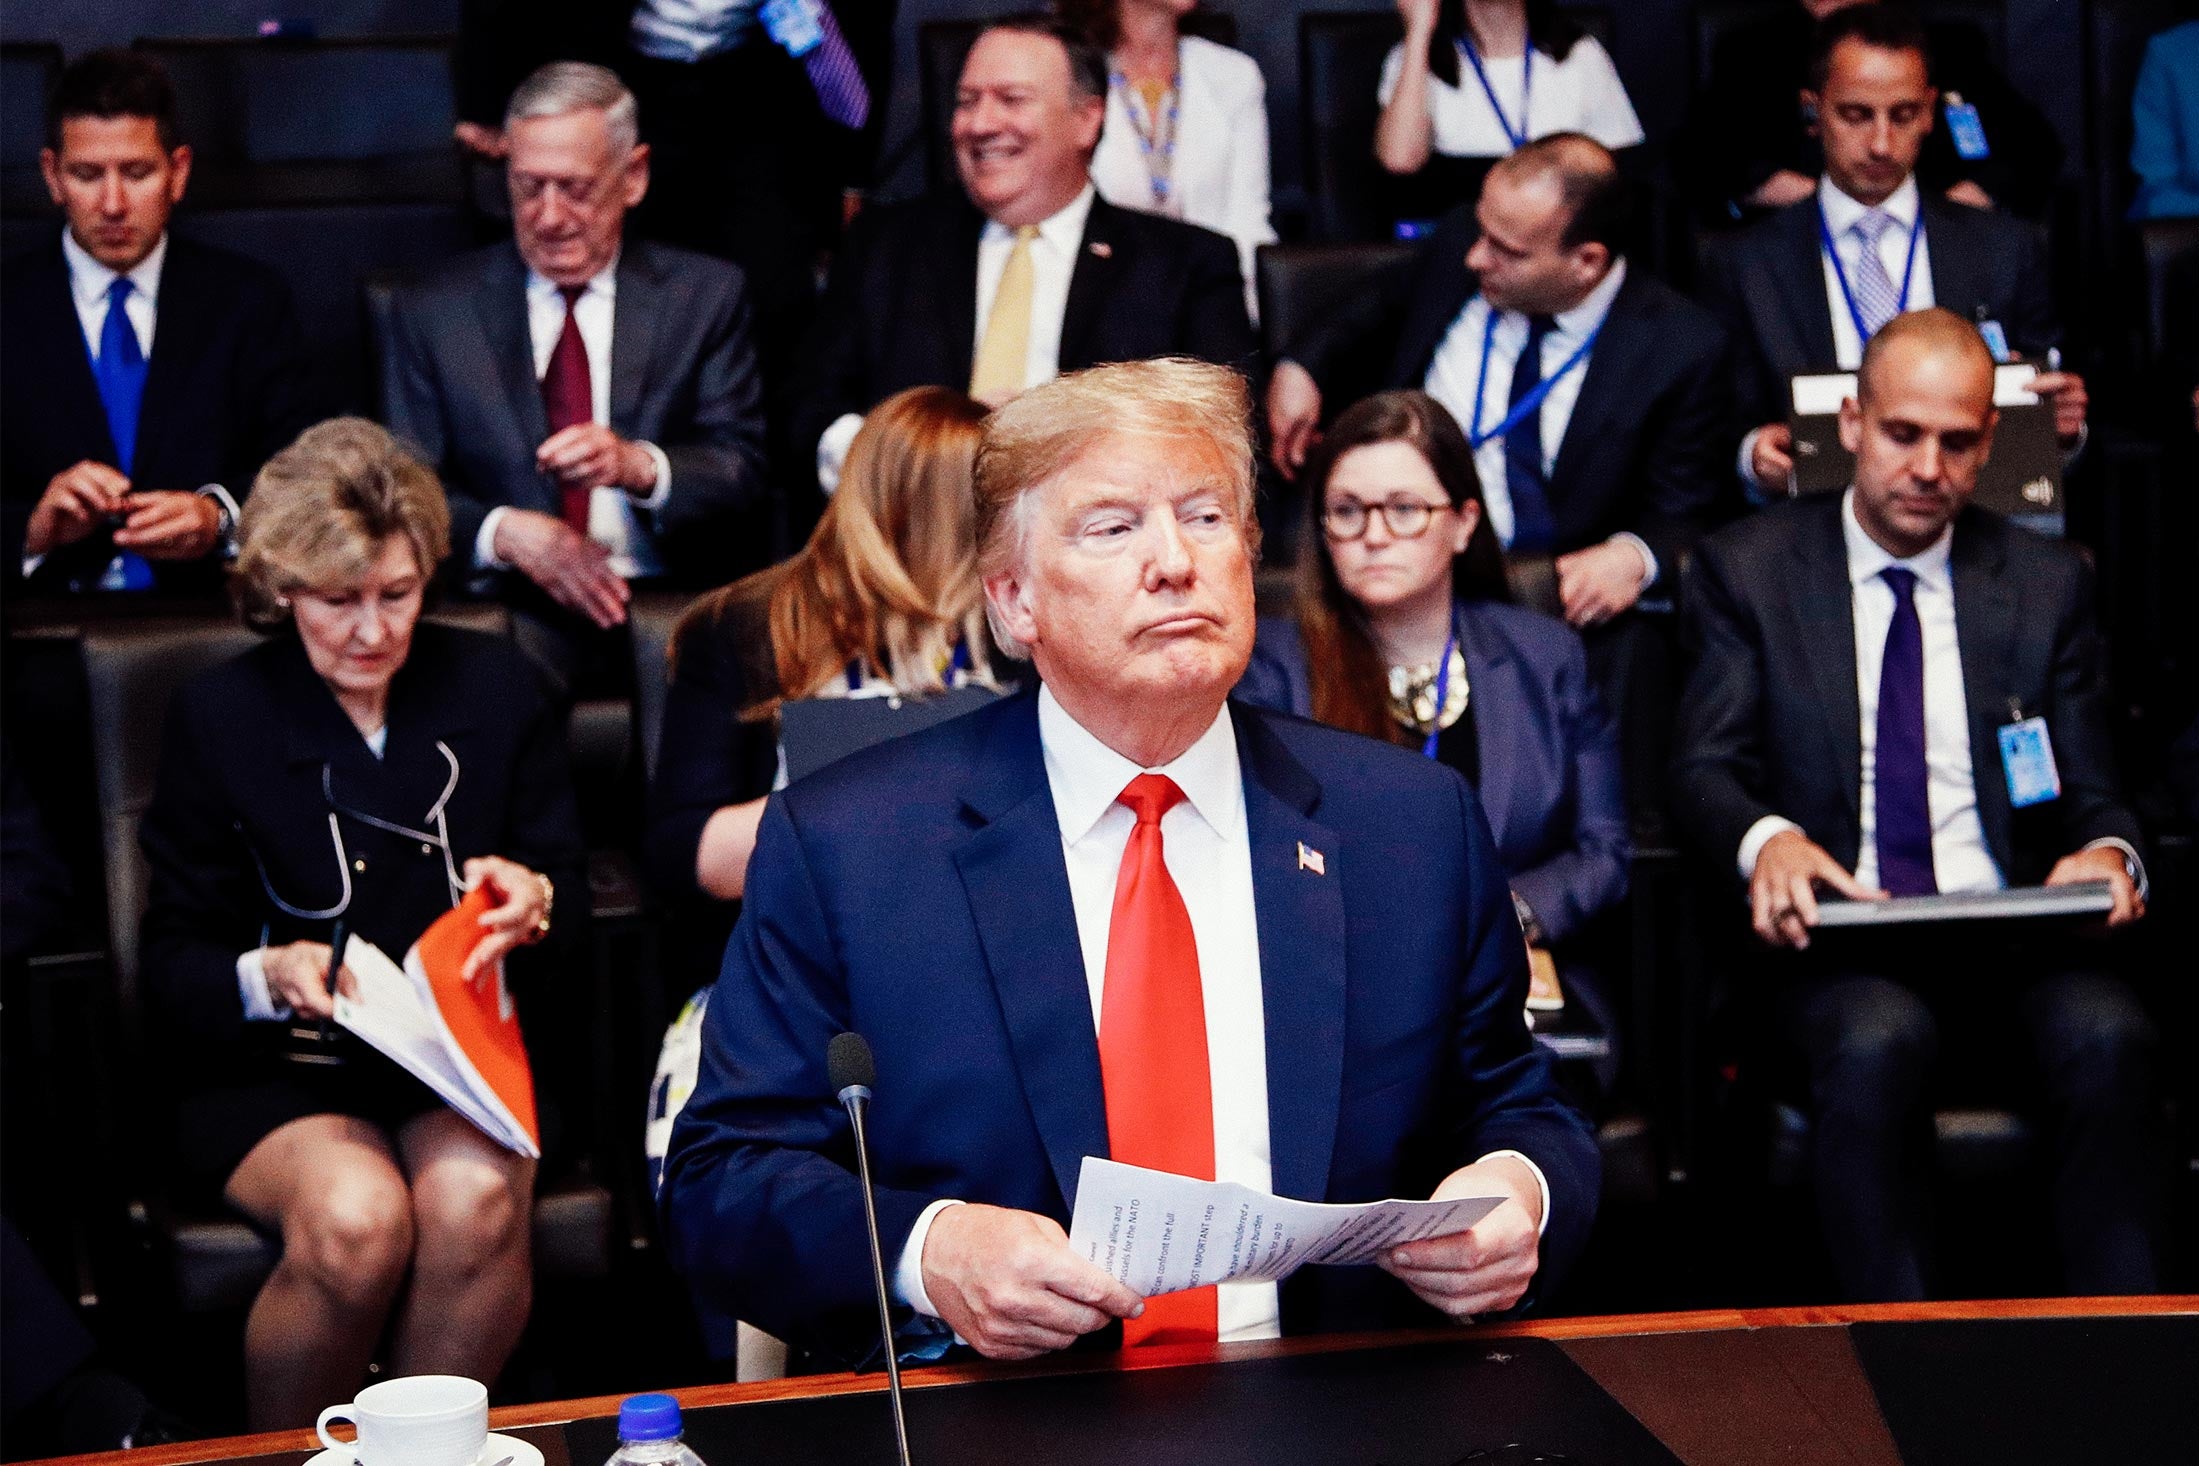 U.S. President Donald Trump attends a meeting of the North Atlantic Council during a NATO summit in Brussels.